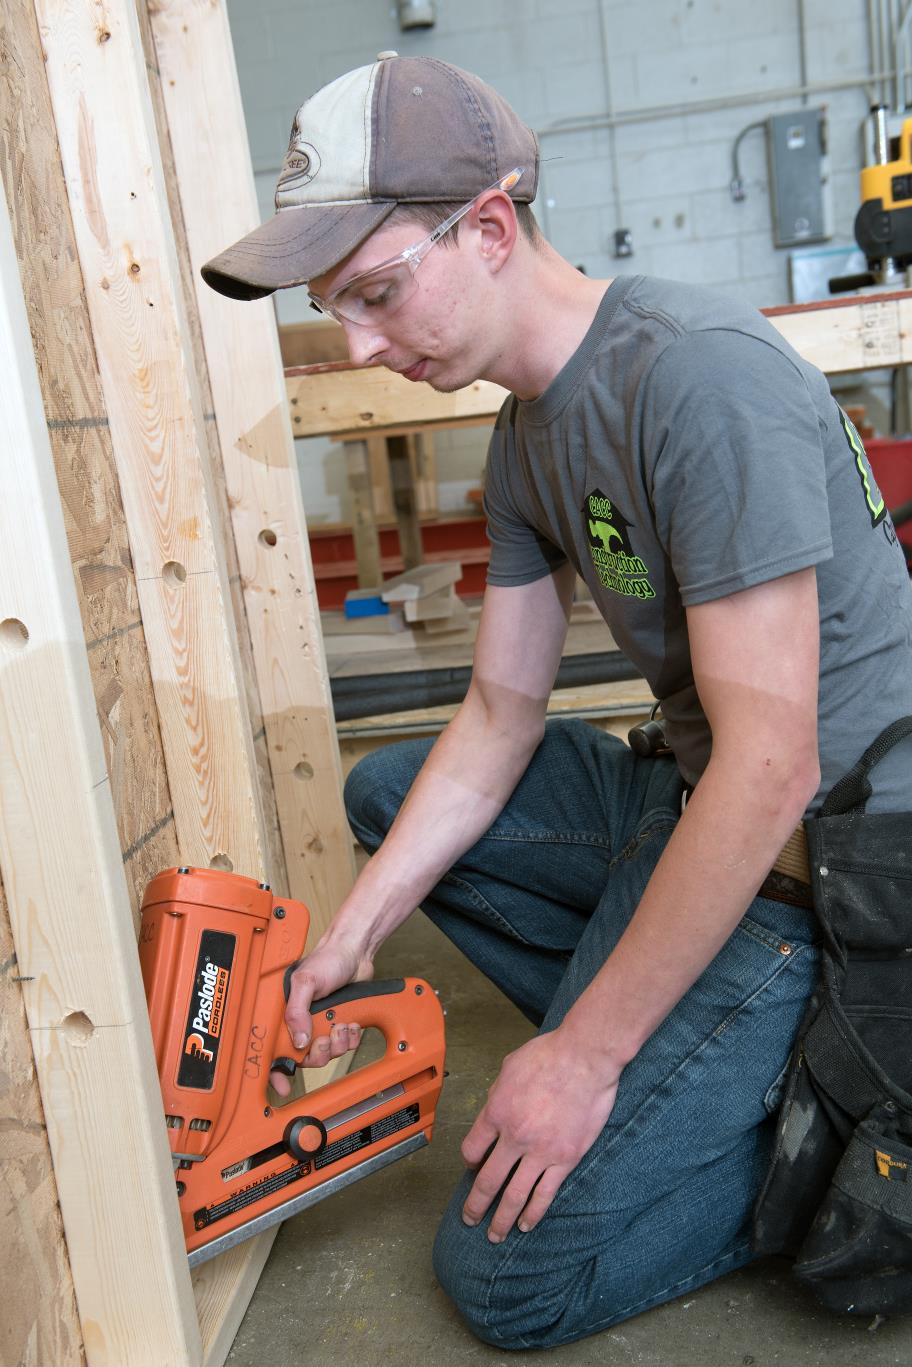 Male construction student uses a nailer to adhere two boards together